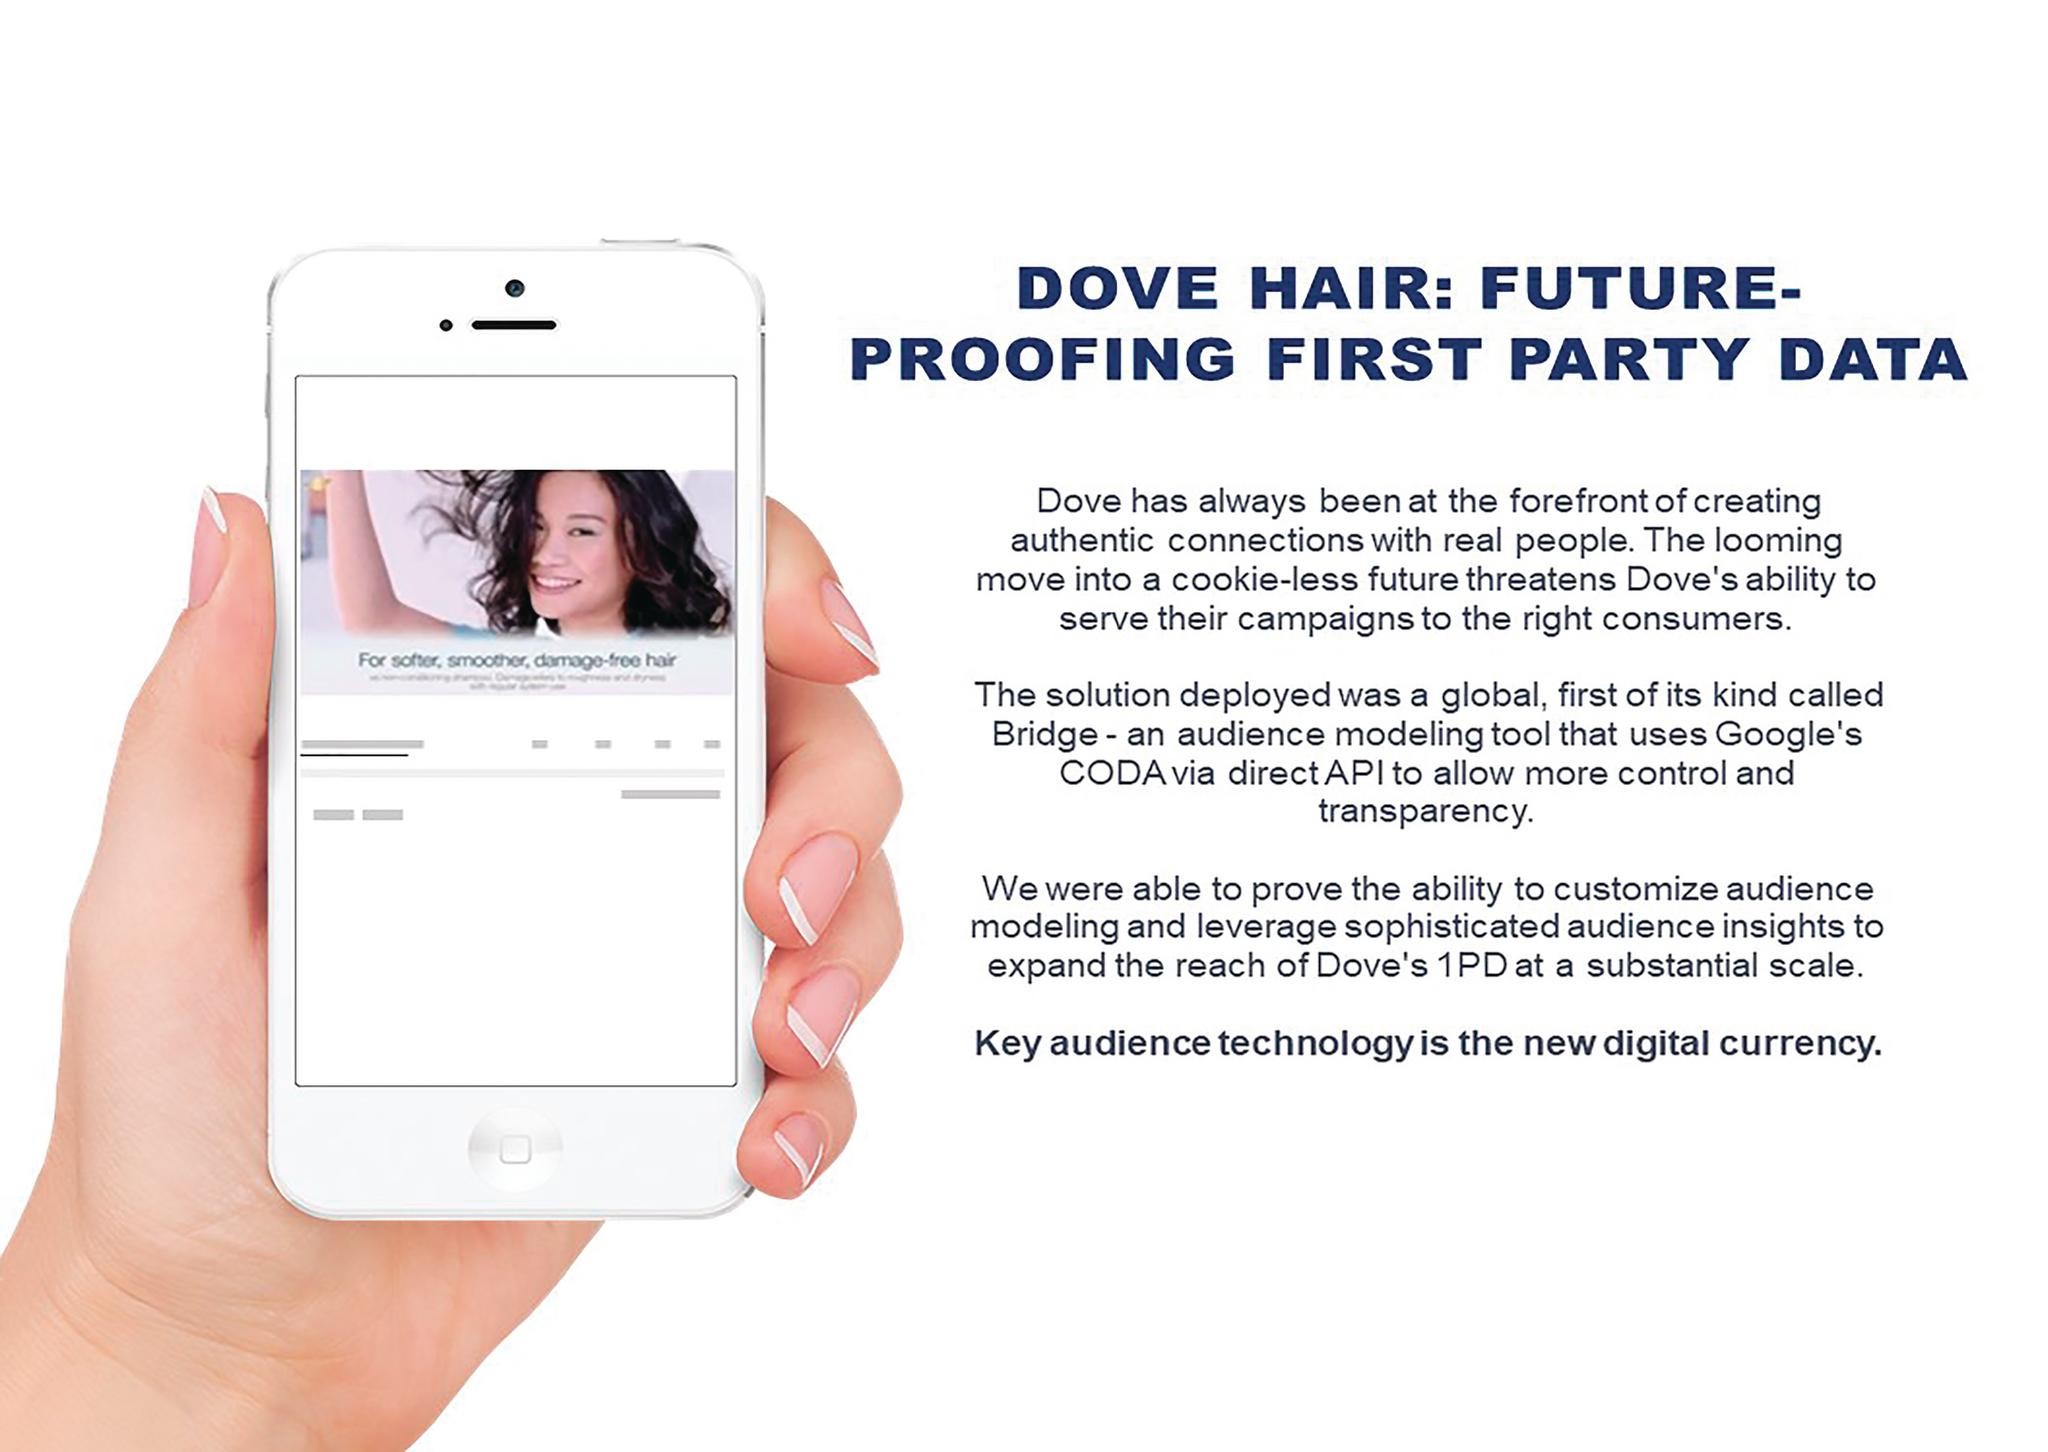 Dove: Future-Proofing in a Cookieless World